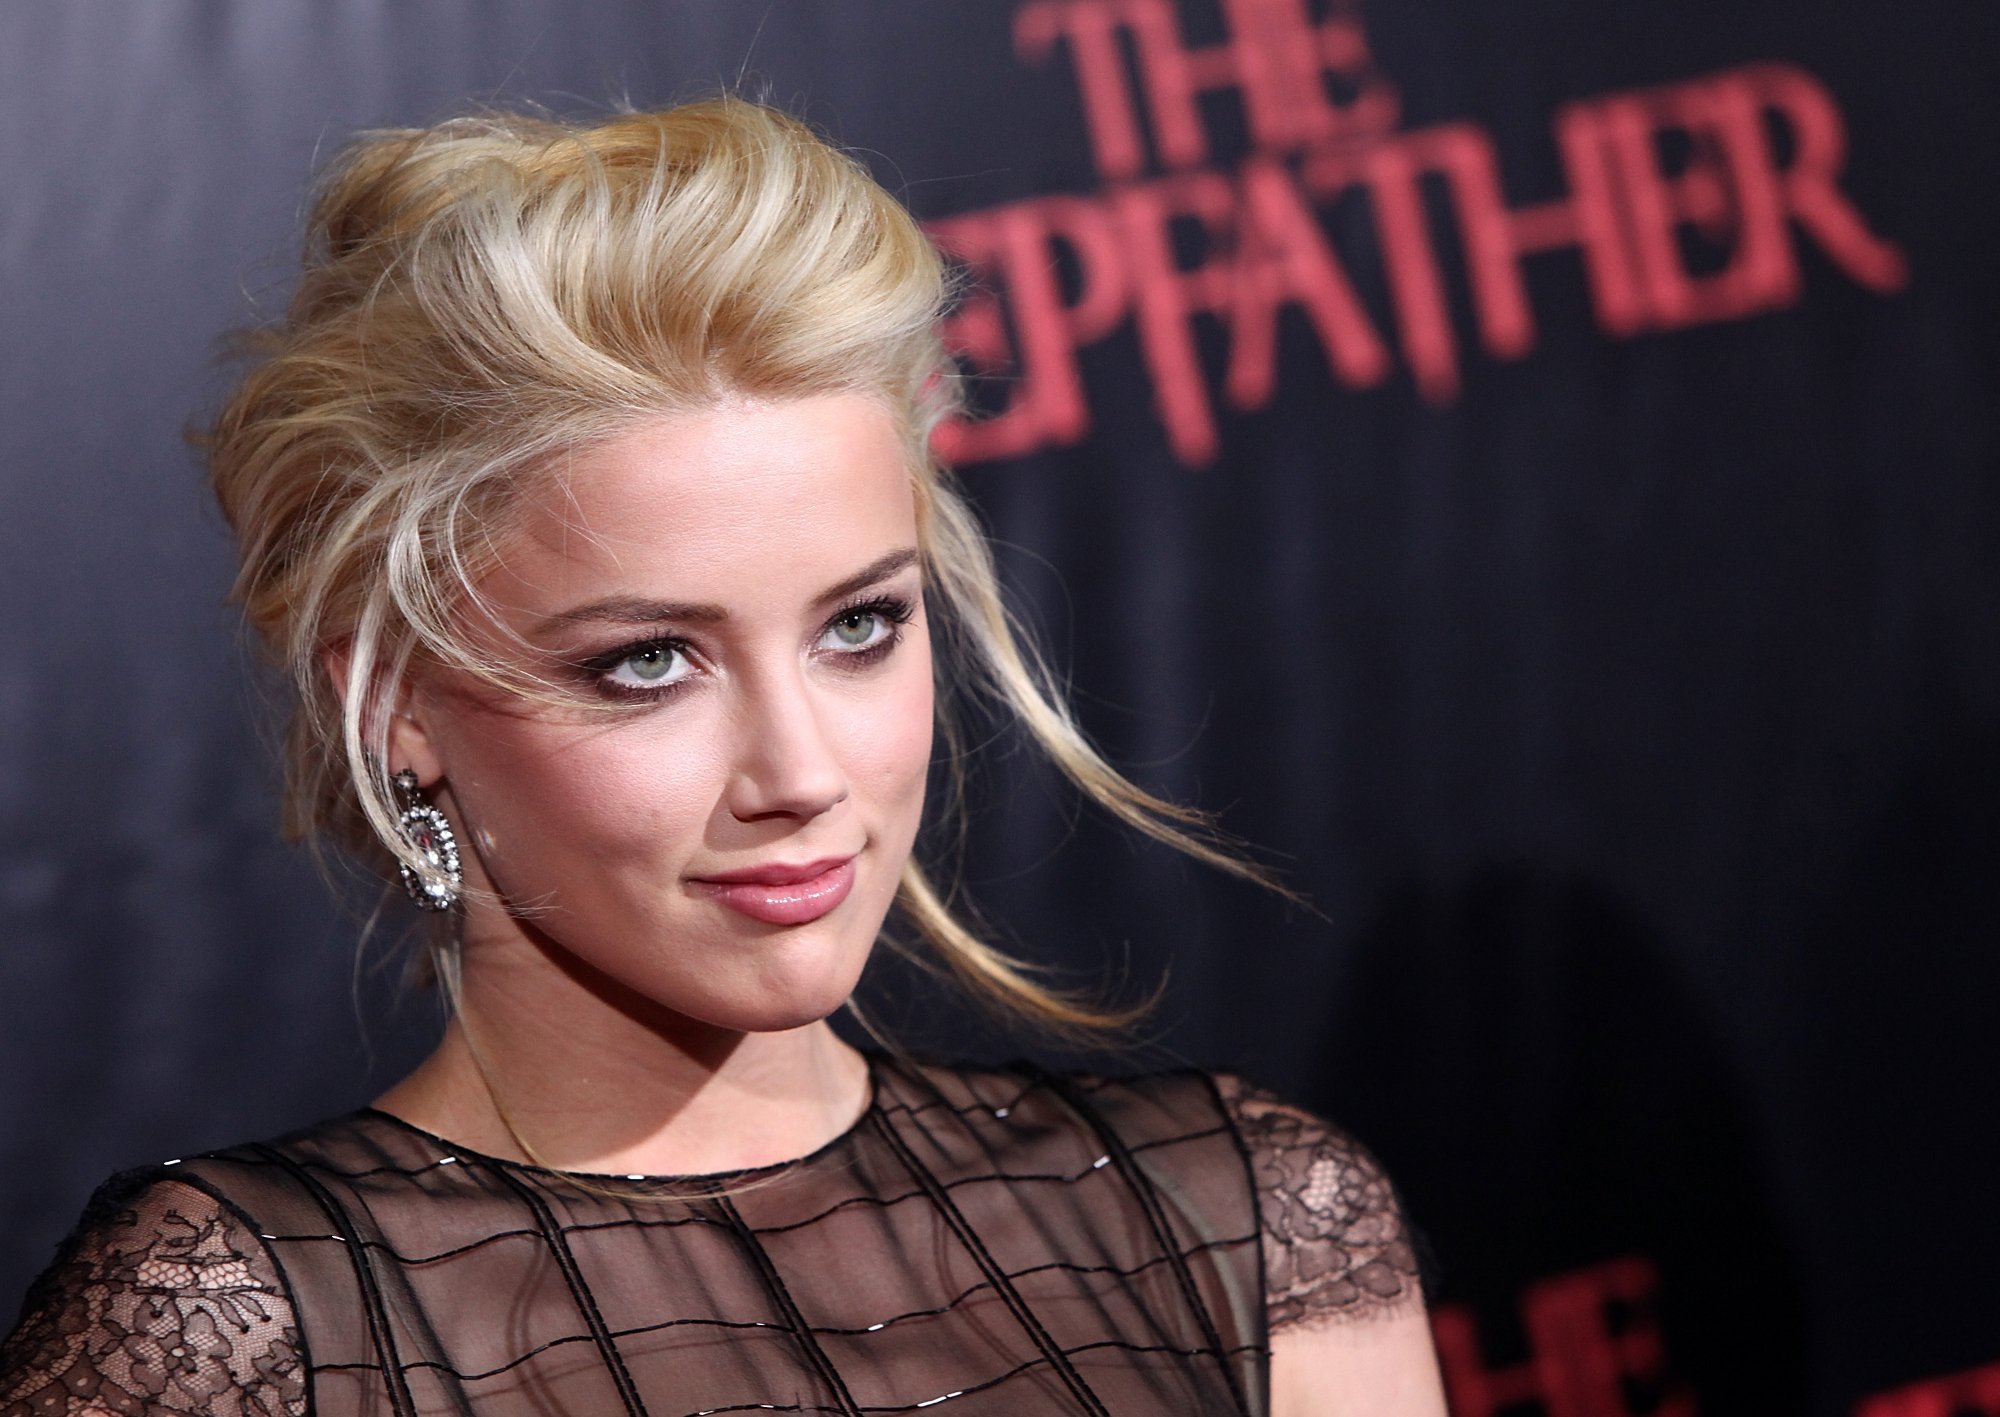 'All the Boys Love Mandy Lane' actor Amber Heard, who Johnny Depp had to teach 'stillness' to for 'The Rum Diary' wearing a black dress in front of 'The Stepfather' step and repeat